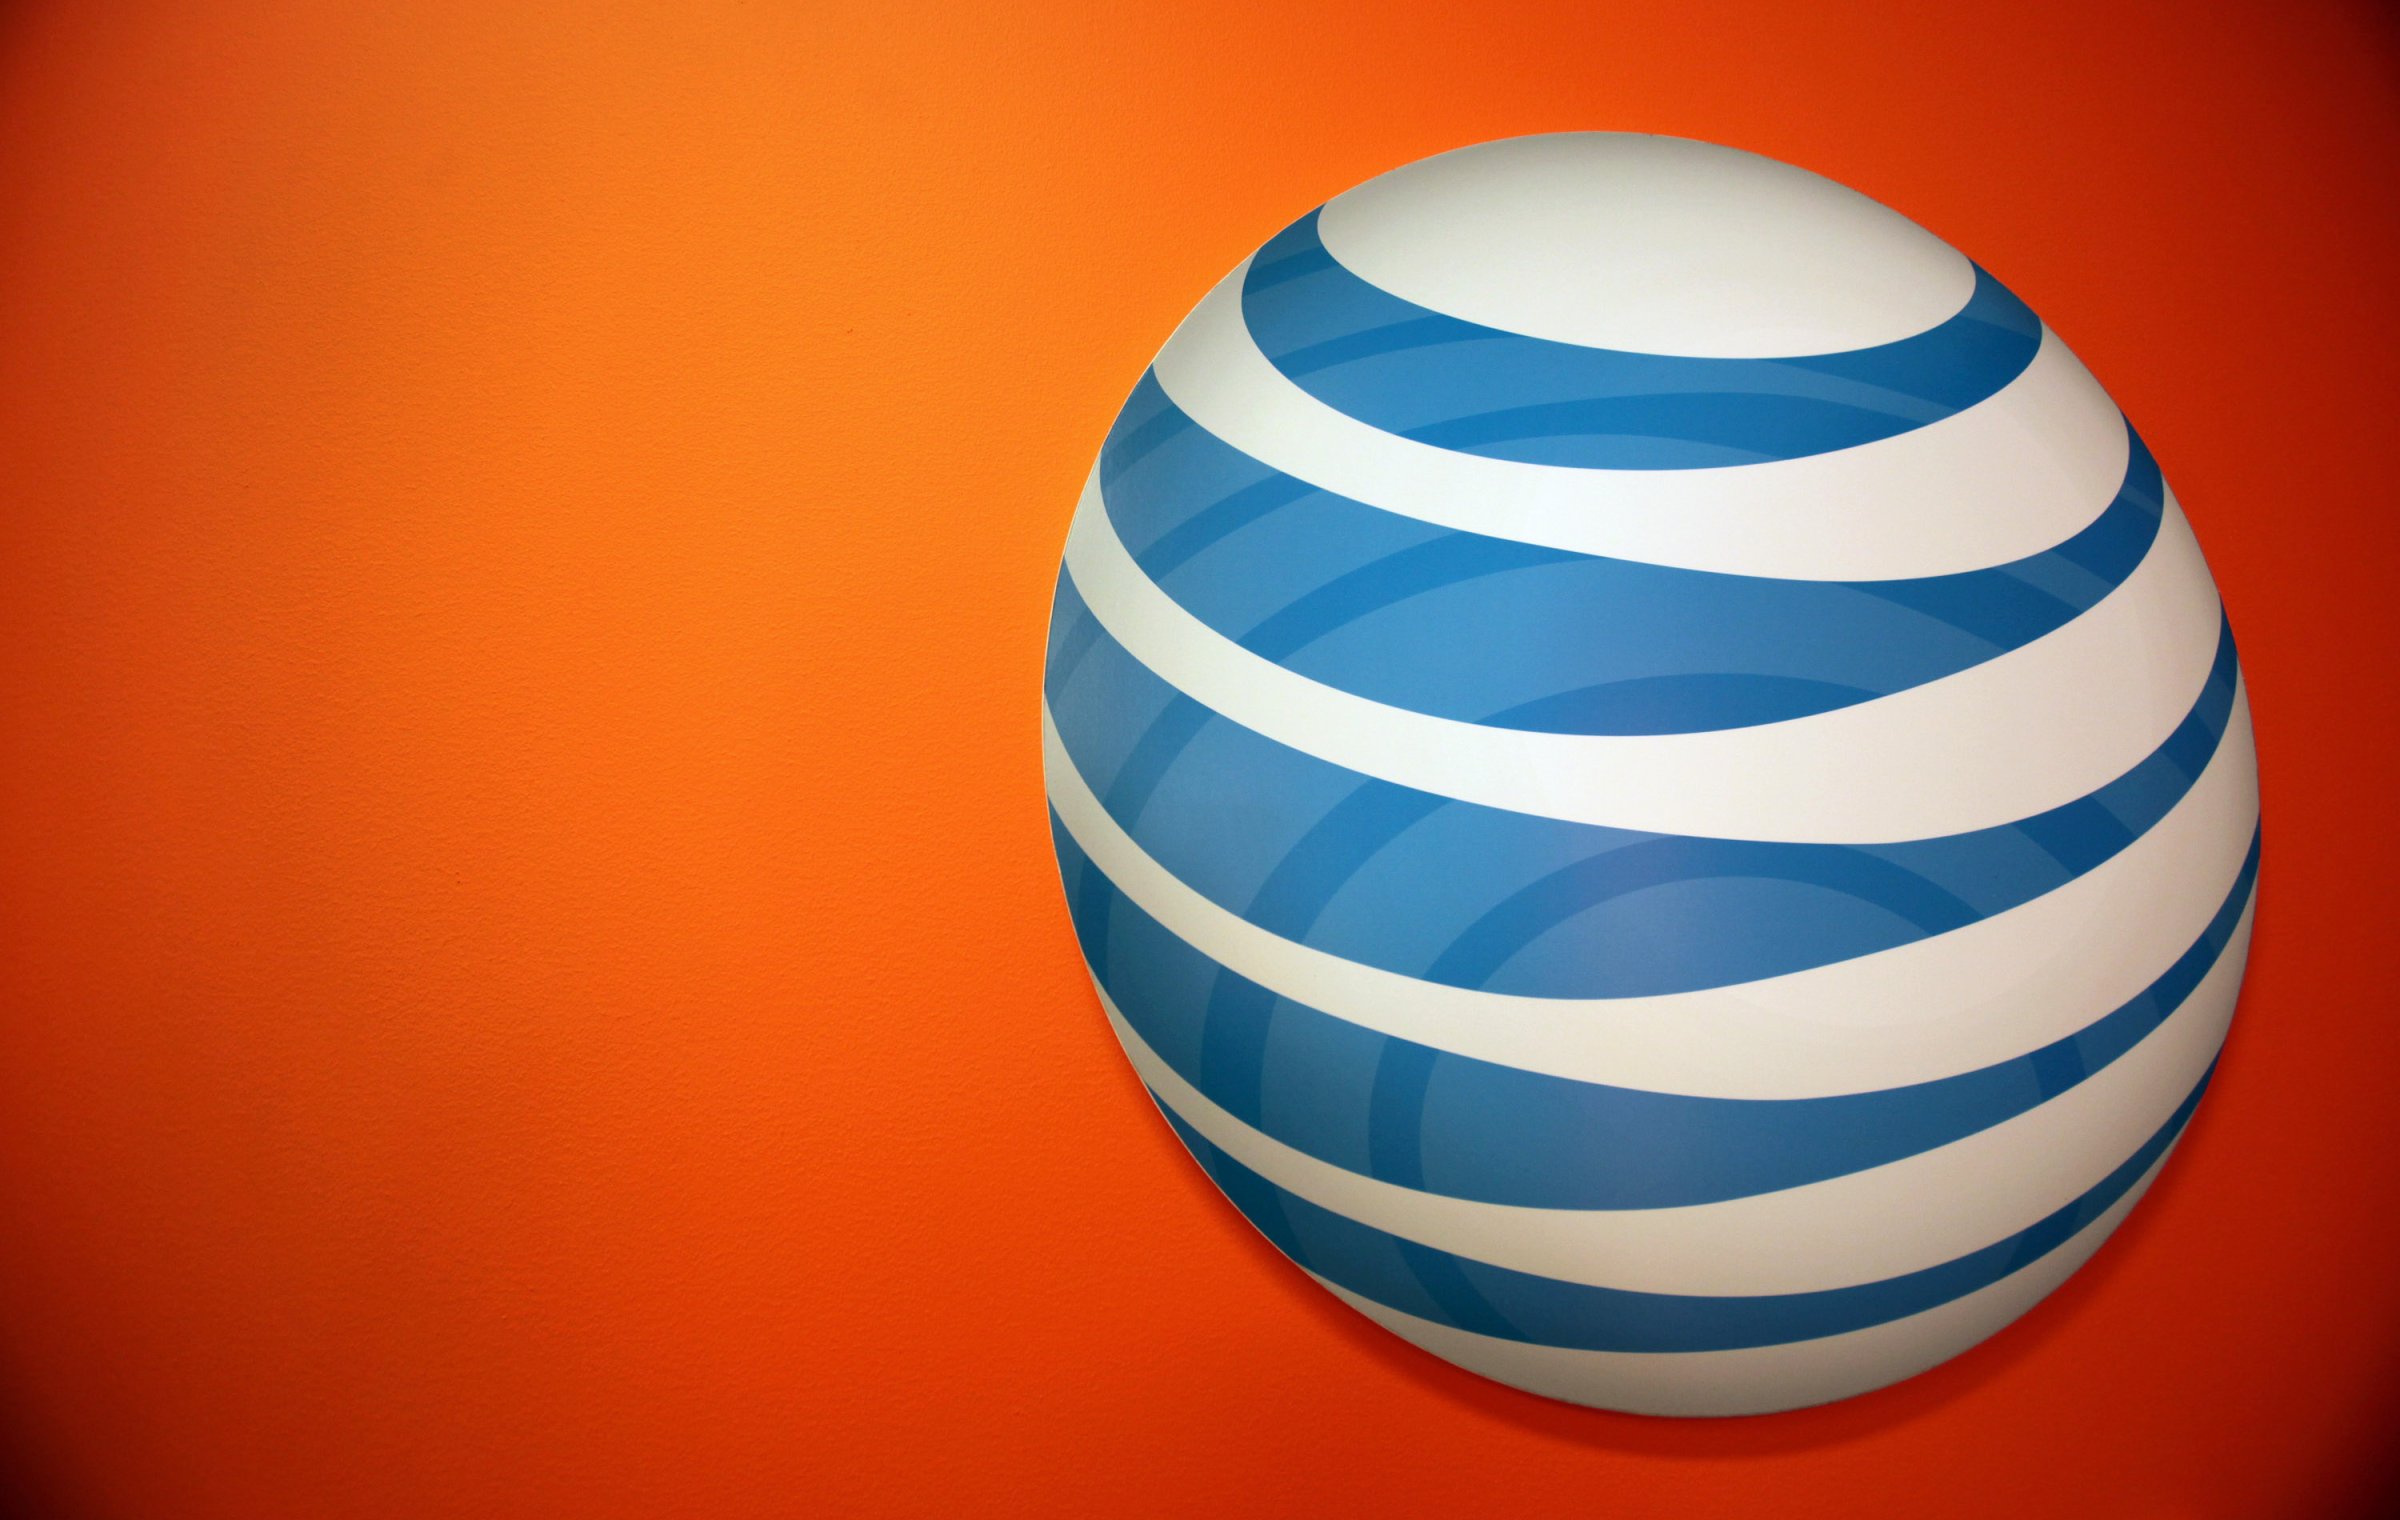 AT&T Asks U.S. Judge to Throw Out Sprint's Antitrust Lawsuit